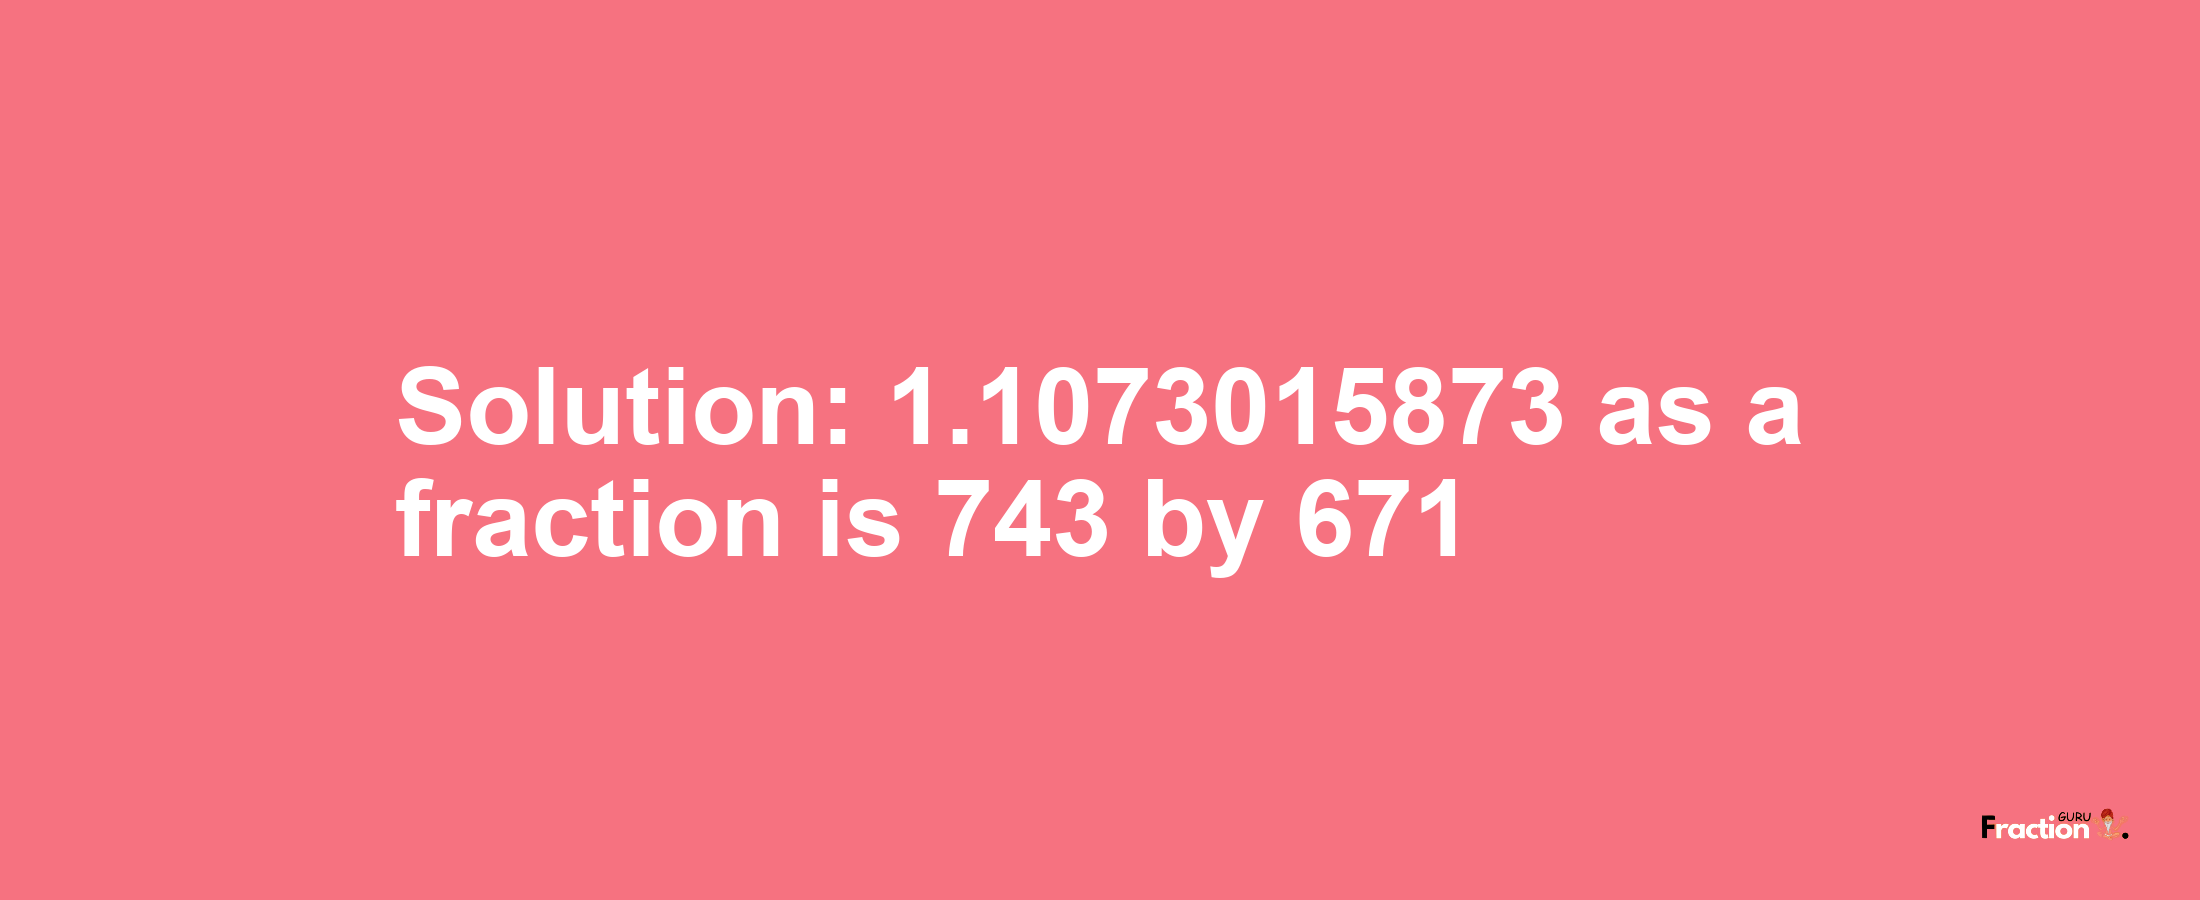 Solution:1.1073015873 as a fraction is 743/671